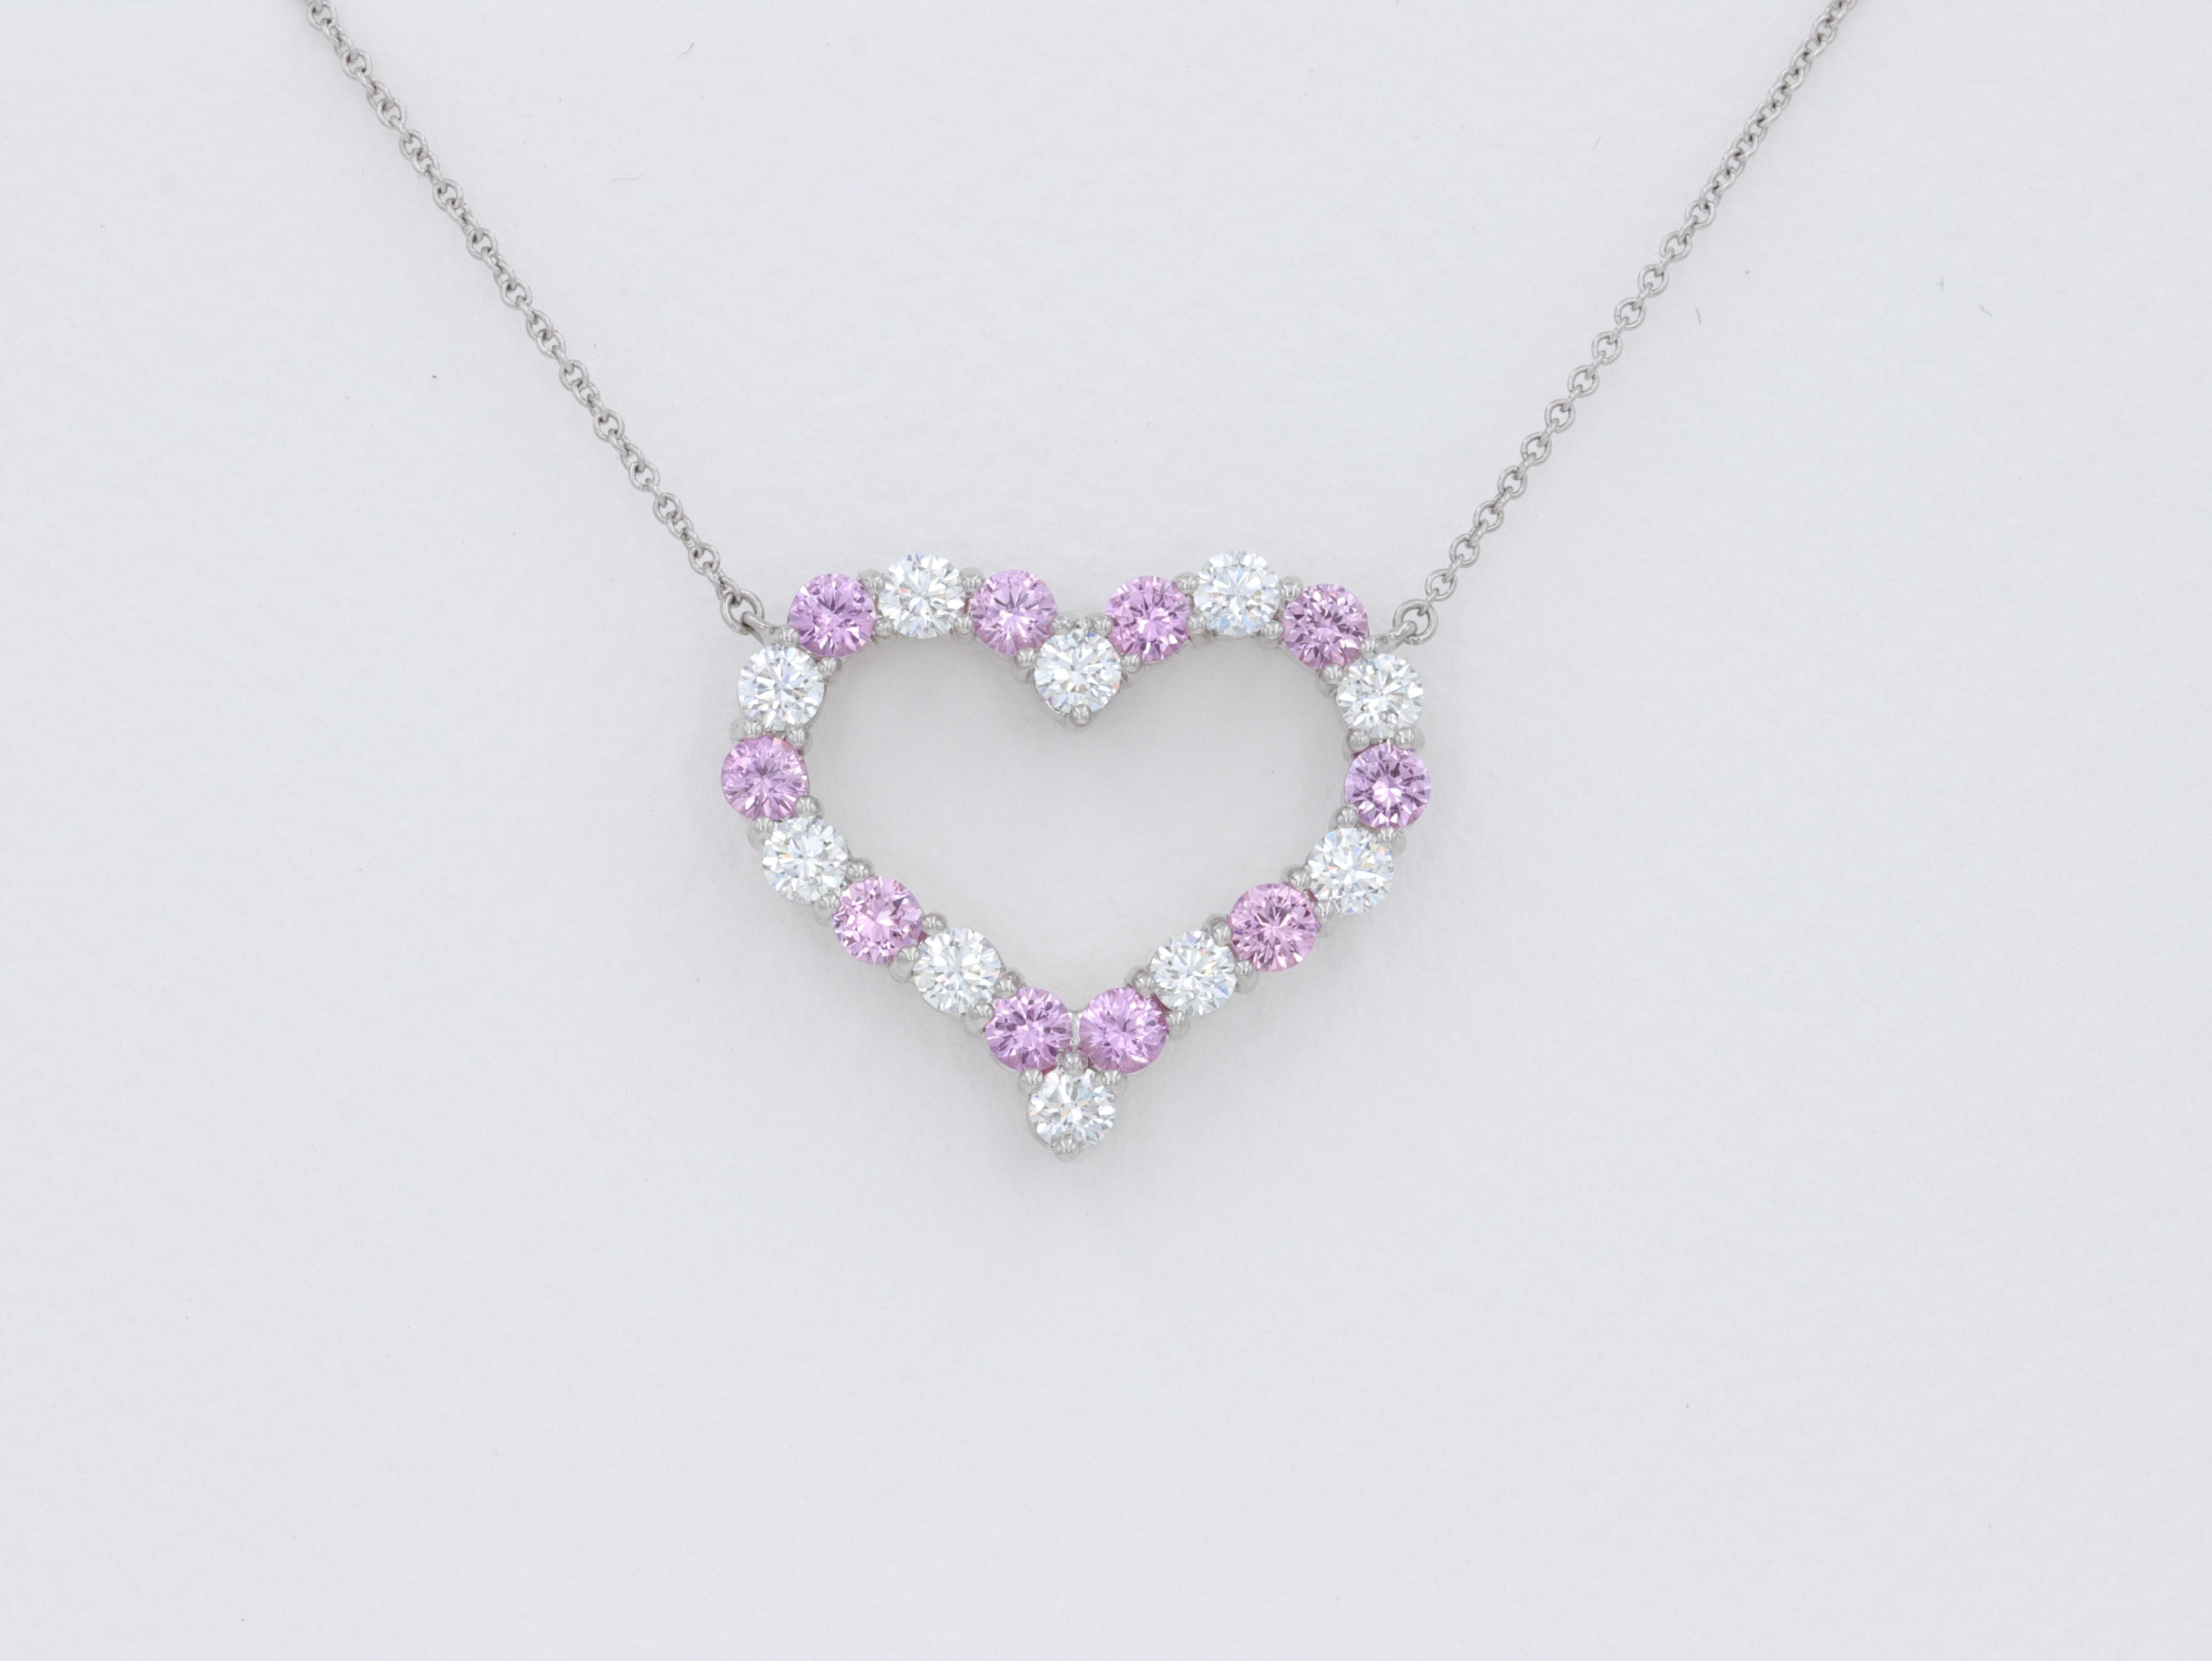 Large Tiffany & Co. Pink Sapphire and Diamond Heart Pendant Necklace featuring fine cut round brilliant diamonds and round cut pink sapphires set in platinum. 

The diamonds weigh approximately 1 carat in total and are of fine quality with colors of